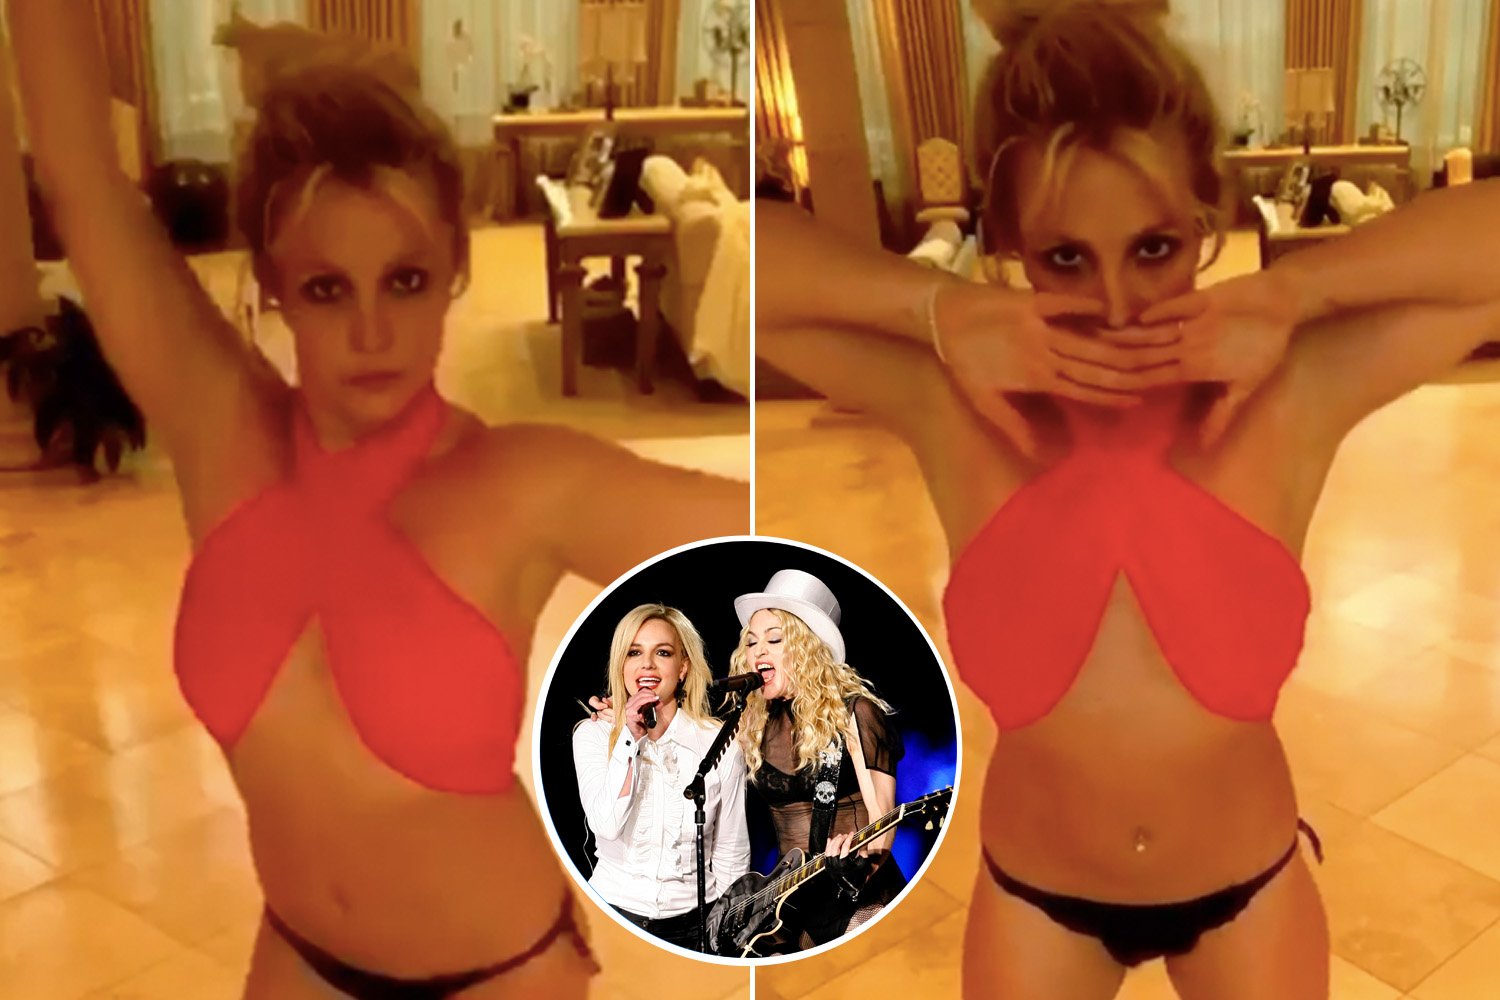 Britney Spears goes nearly topless and dirty dances to Madonna's Justify My Love as conservatorship battle heats up